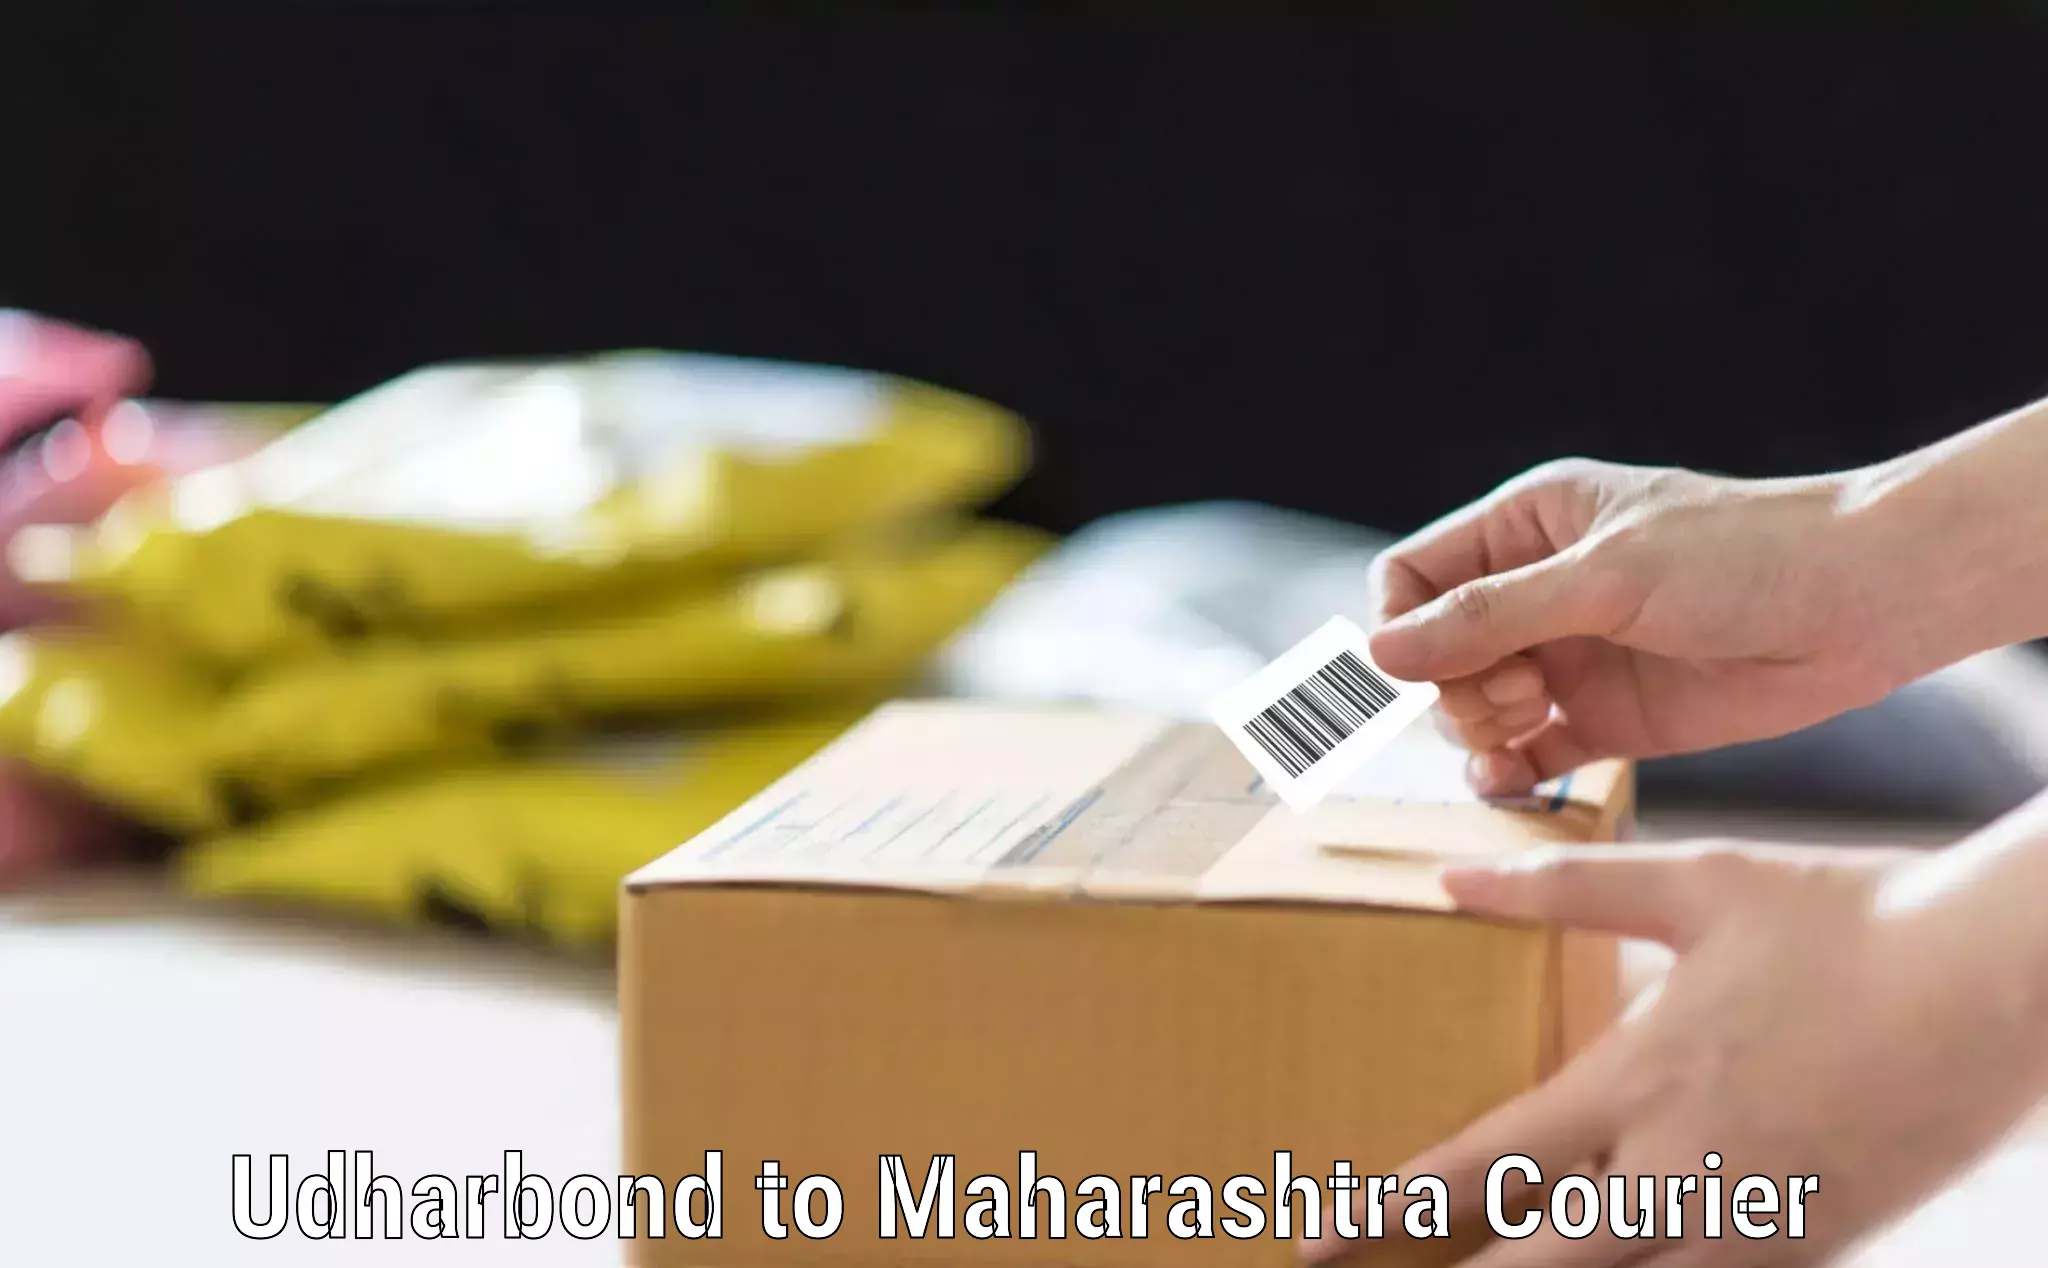 Baggage delivery support Udharbond to Maharashtra